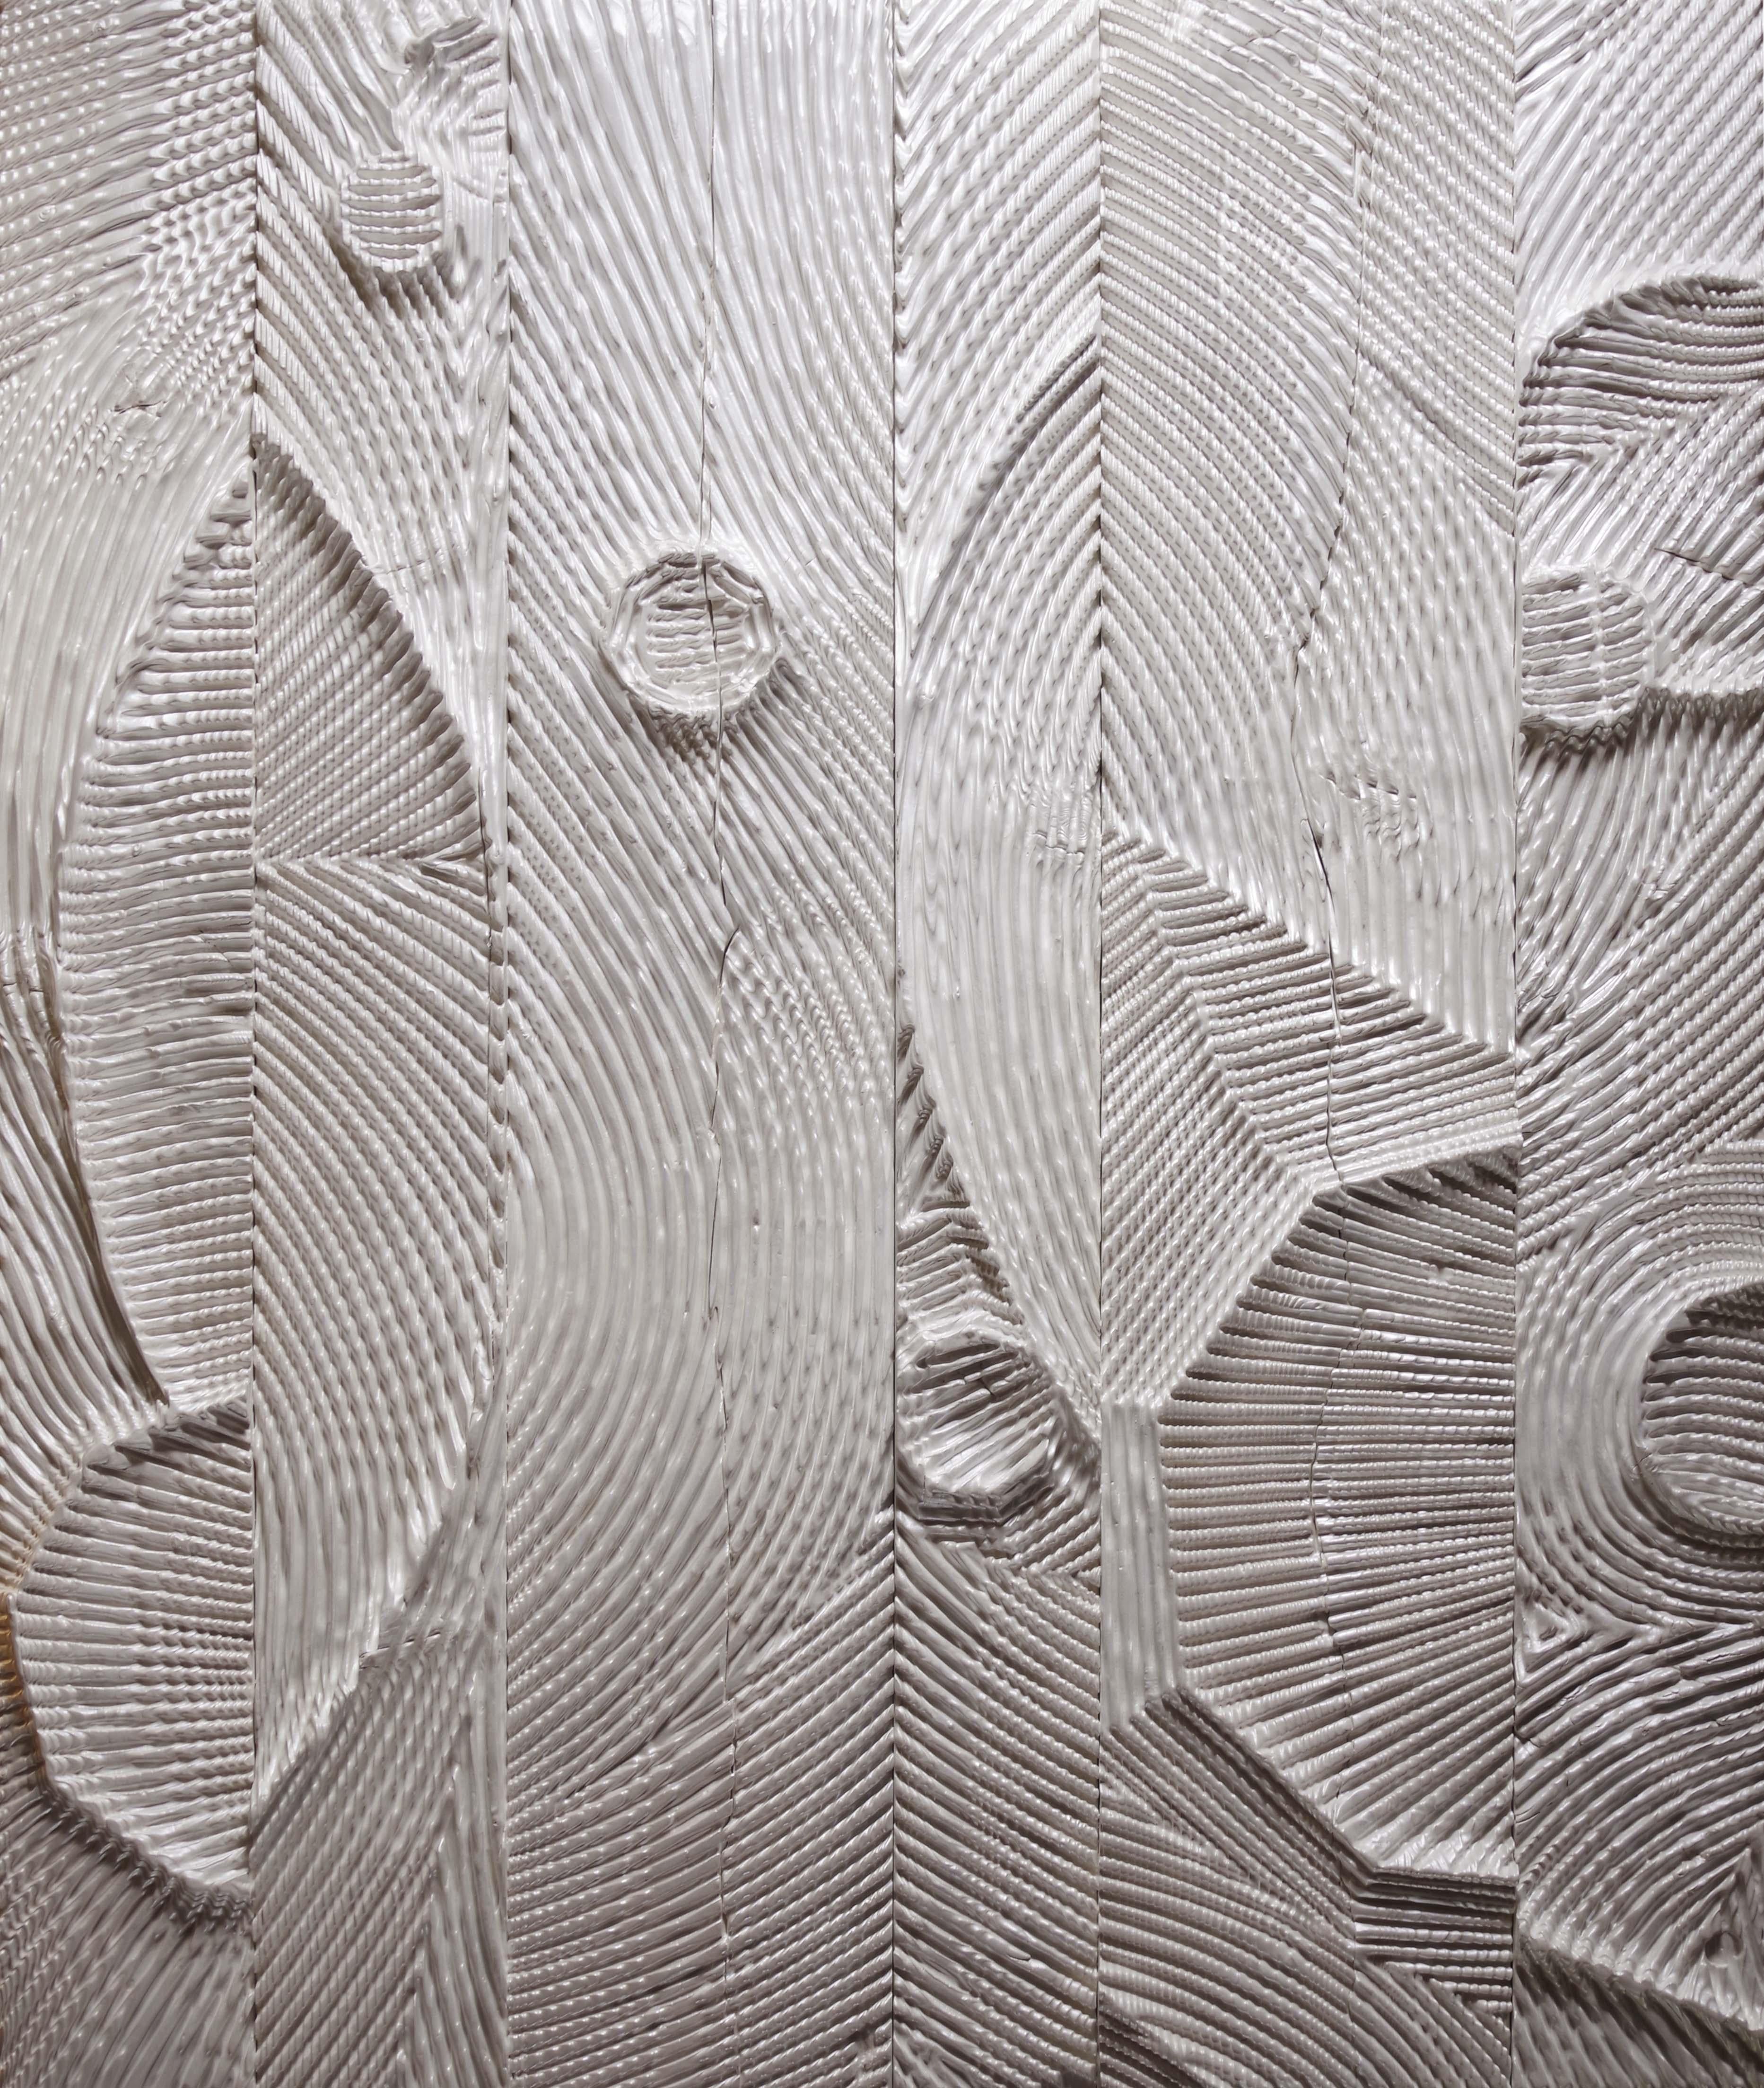 Sculpted Wood Panel Abstraction by Etienne Moyat France 2022 France